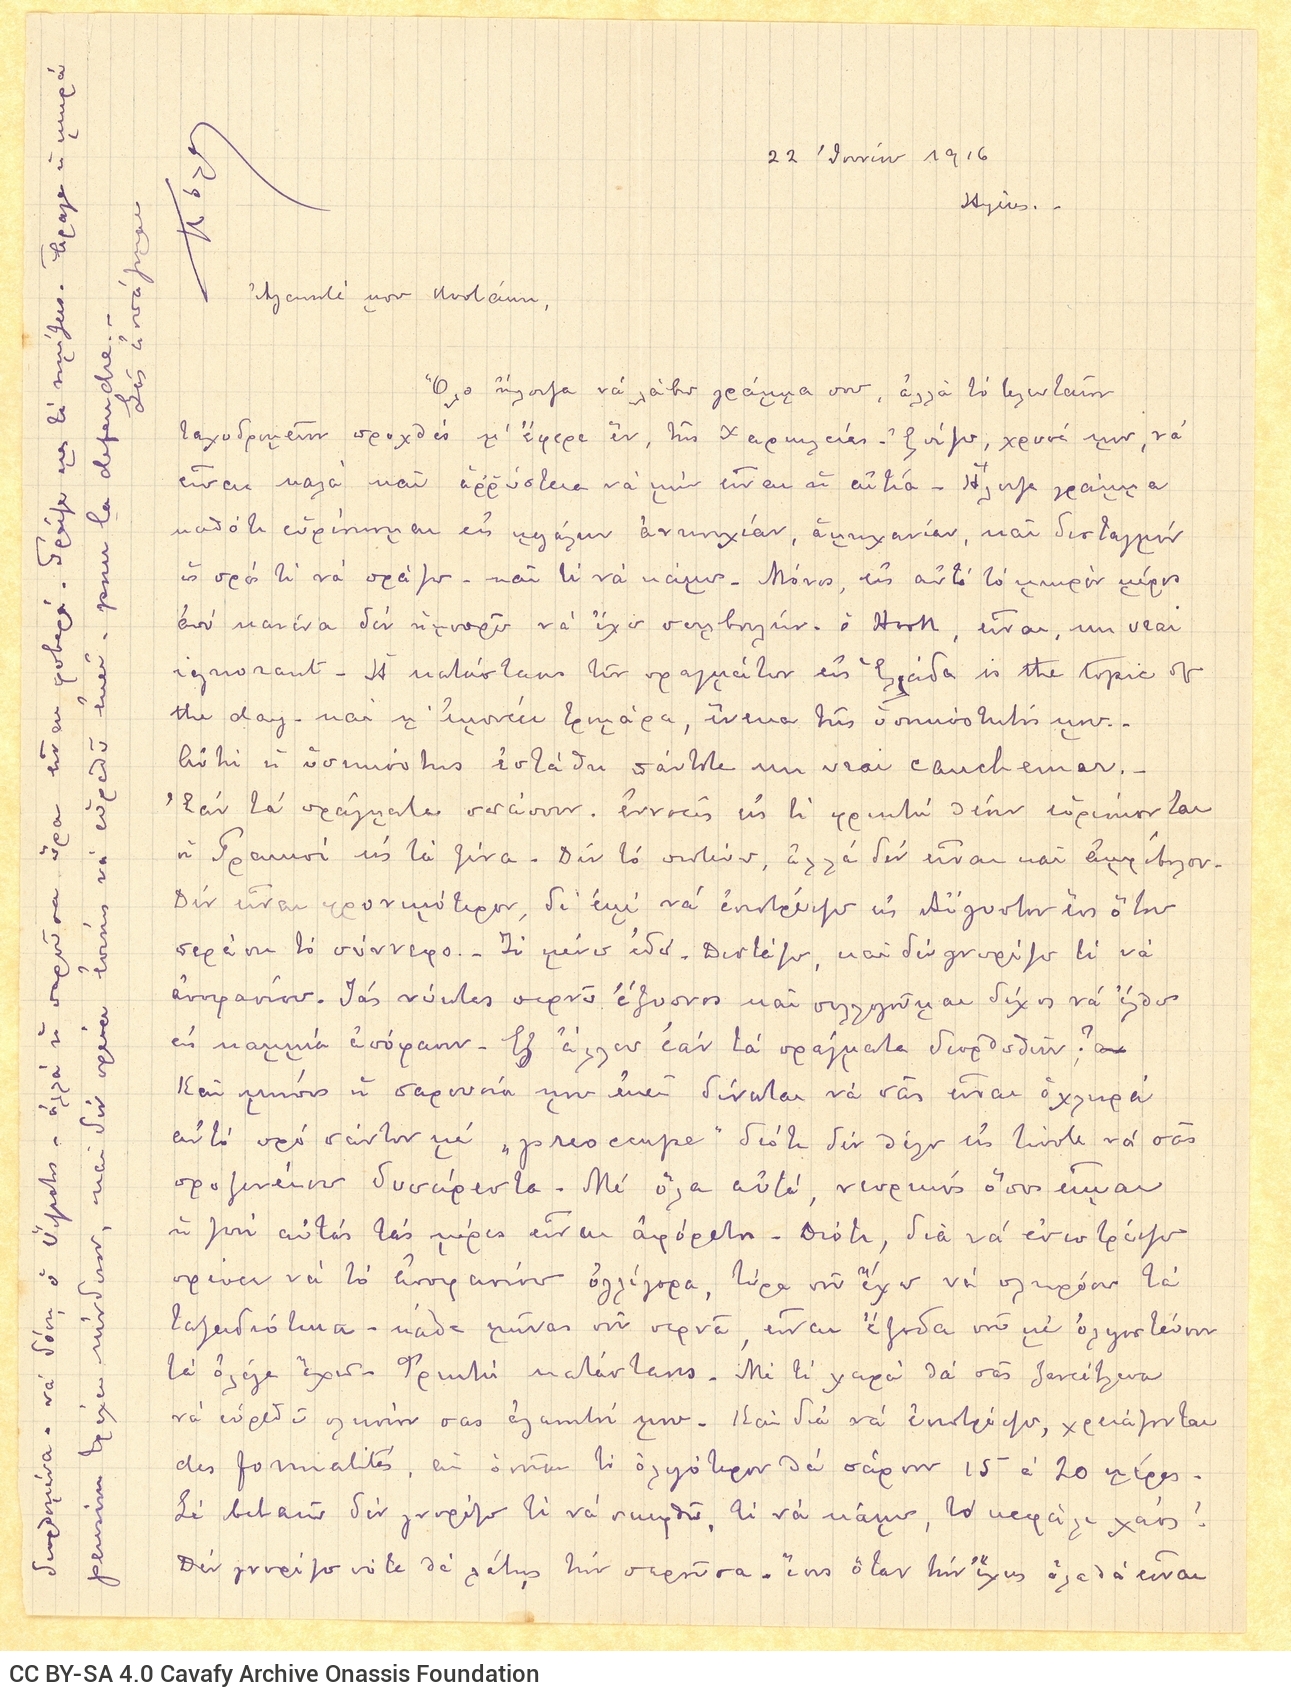 Handwritten letter by Paul Cavafy to C. P. Cavafy from Hyères, France. Concern for the developments in Greece, considering t